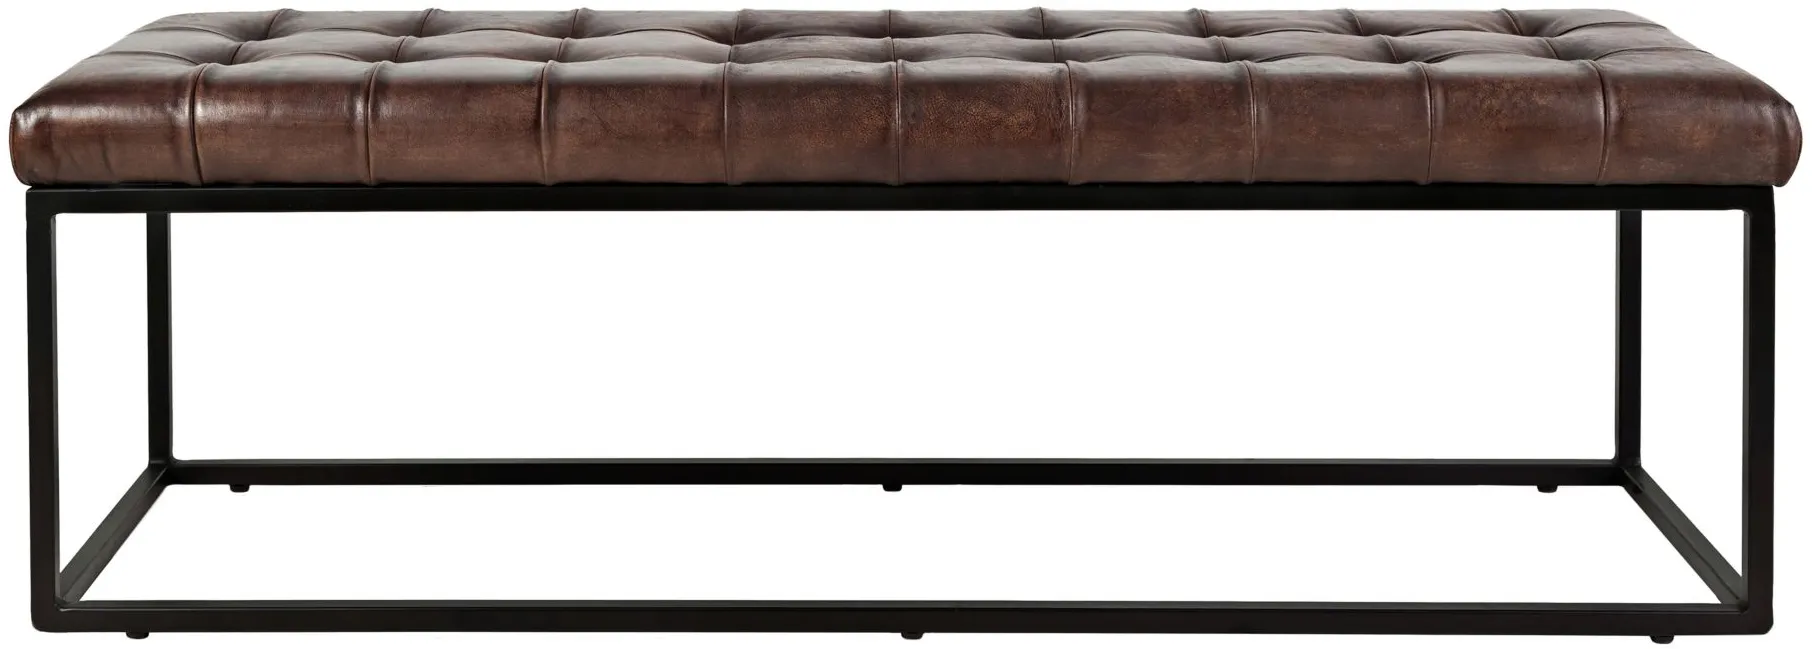 Global Furniture Archive Leather Bench in Brown / Dark Sienna by Jofran